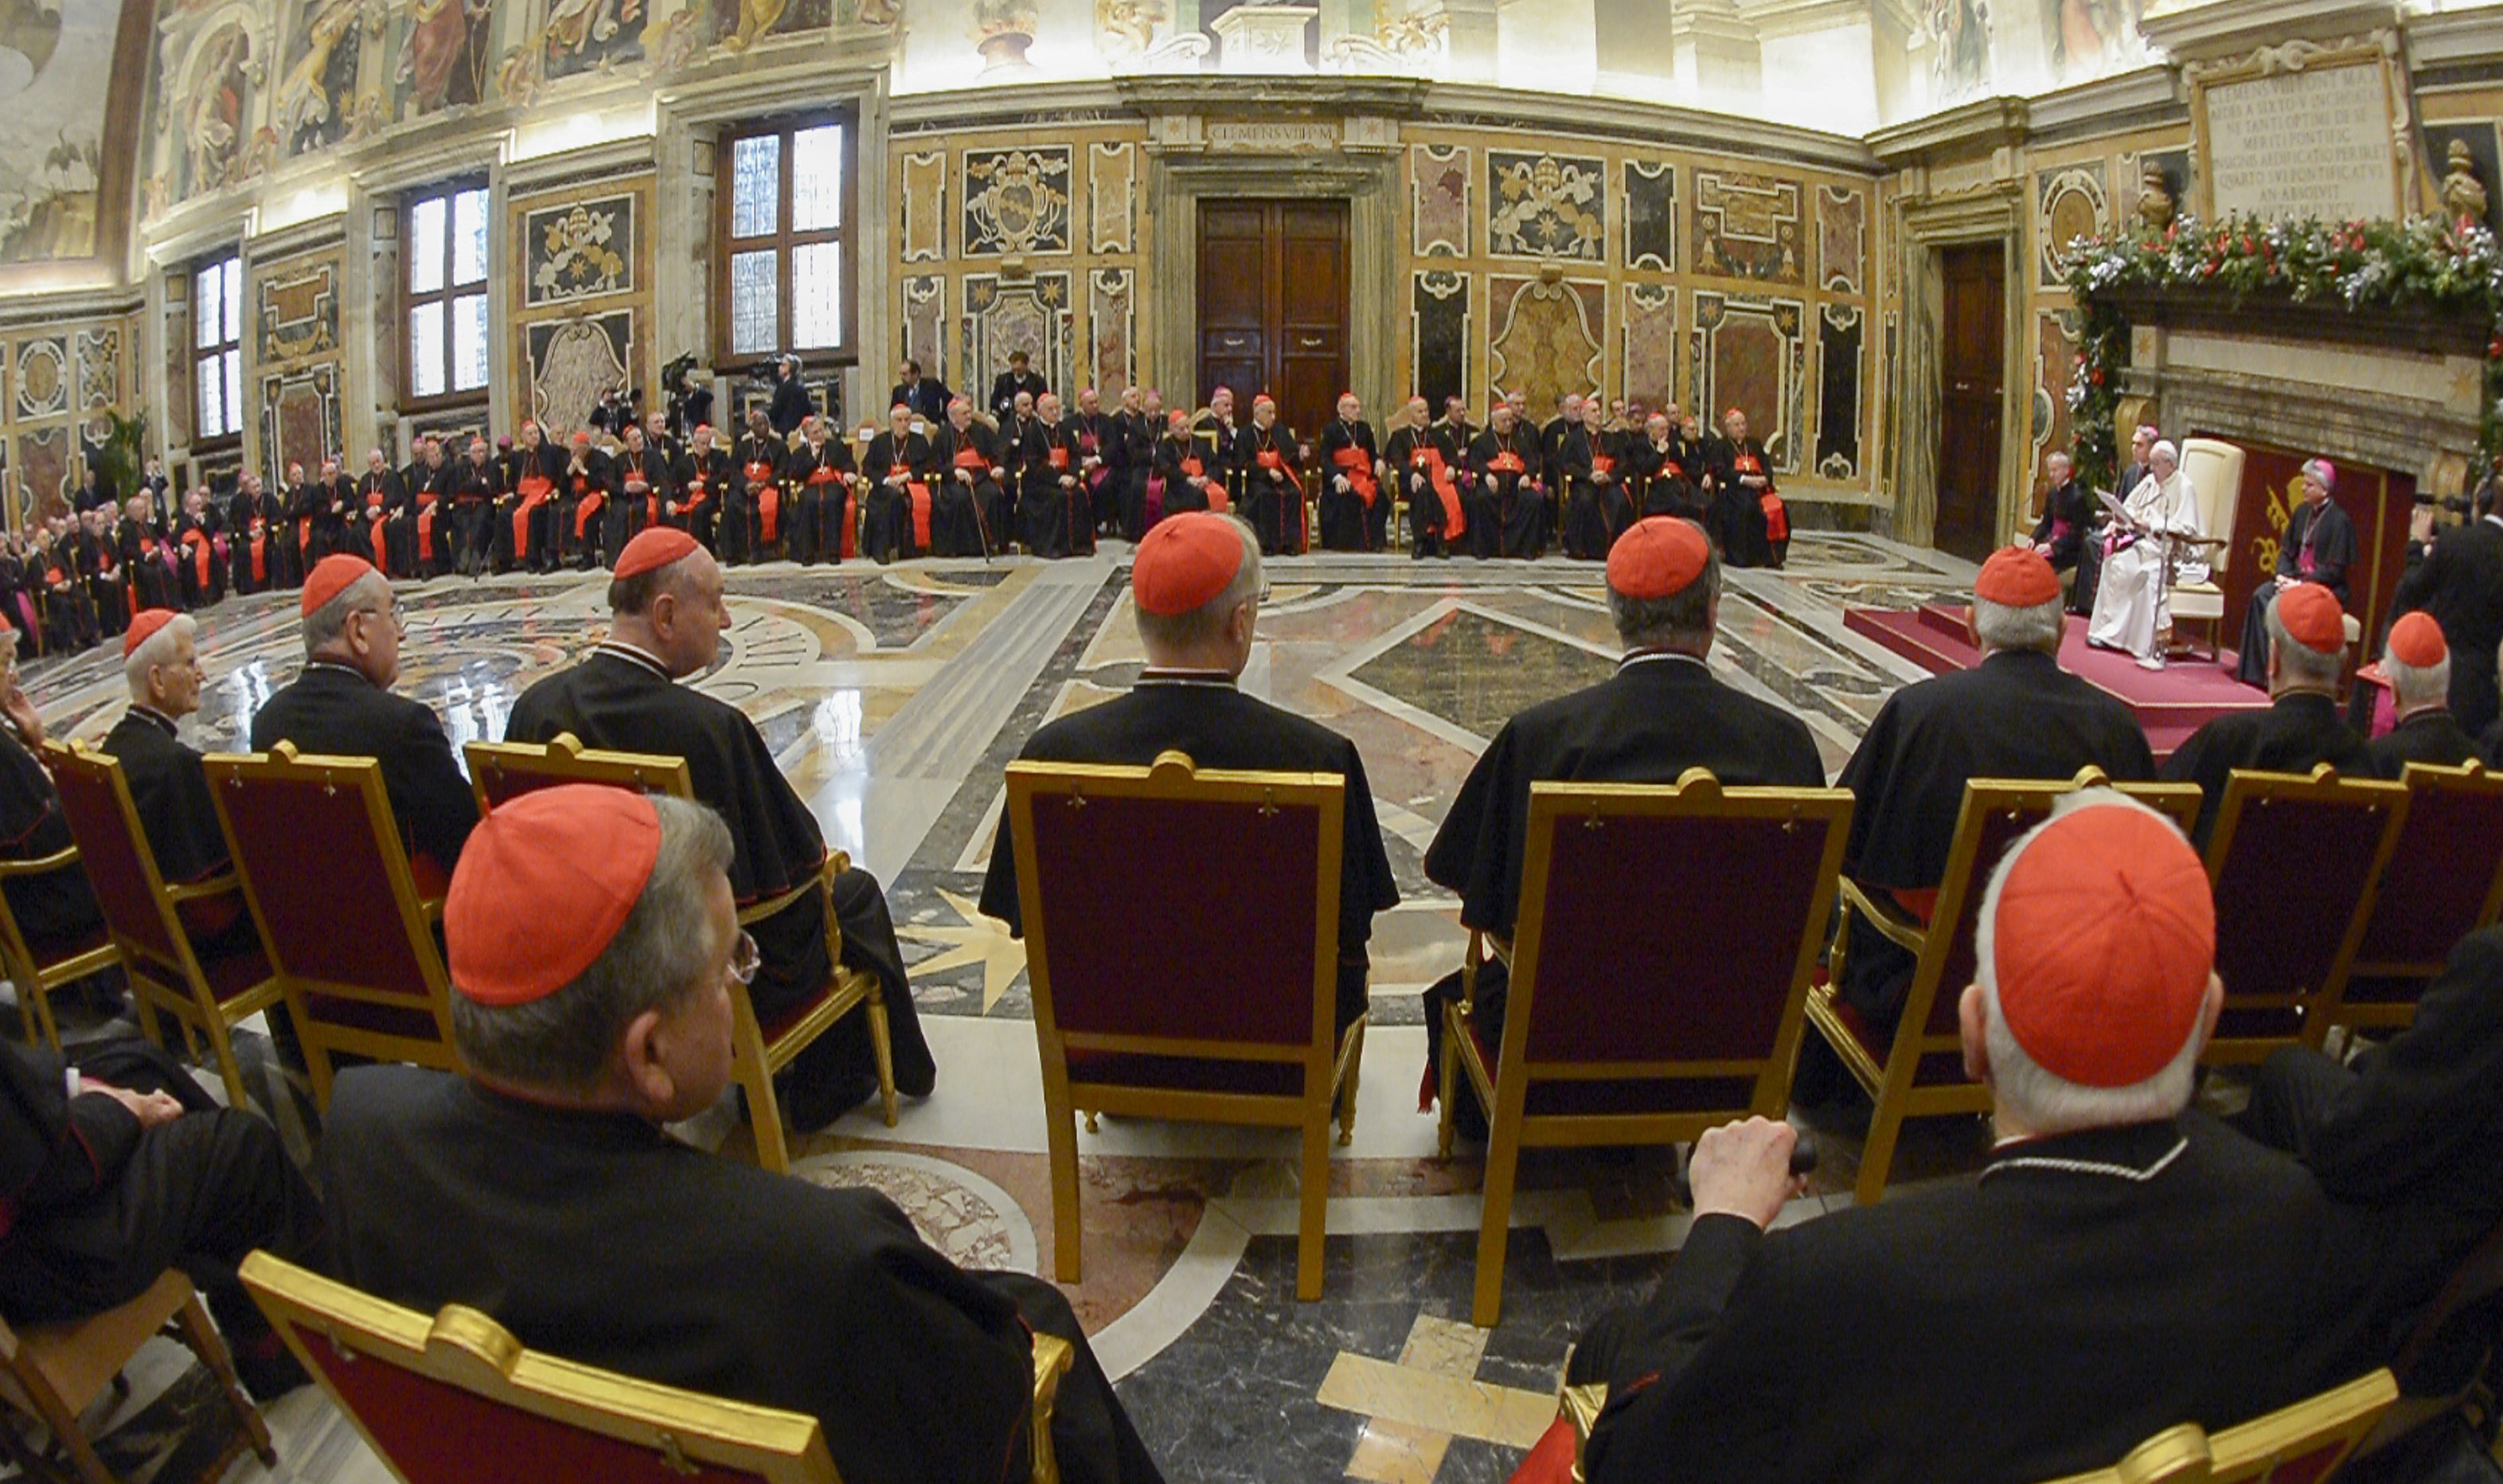 Pope Francis speaks to the Roman Curia in the Clementine Hall of the Apostolic Palace at the Vatican Dec. 21. (CNS/L'Osservatore Romano, handout)